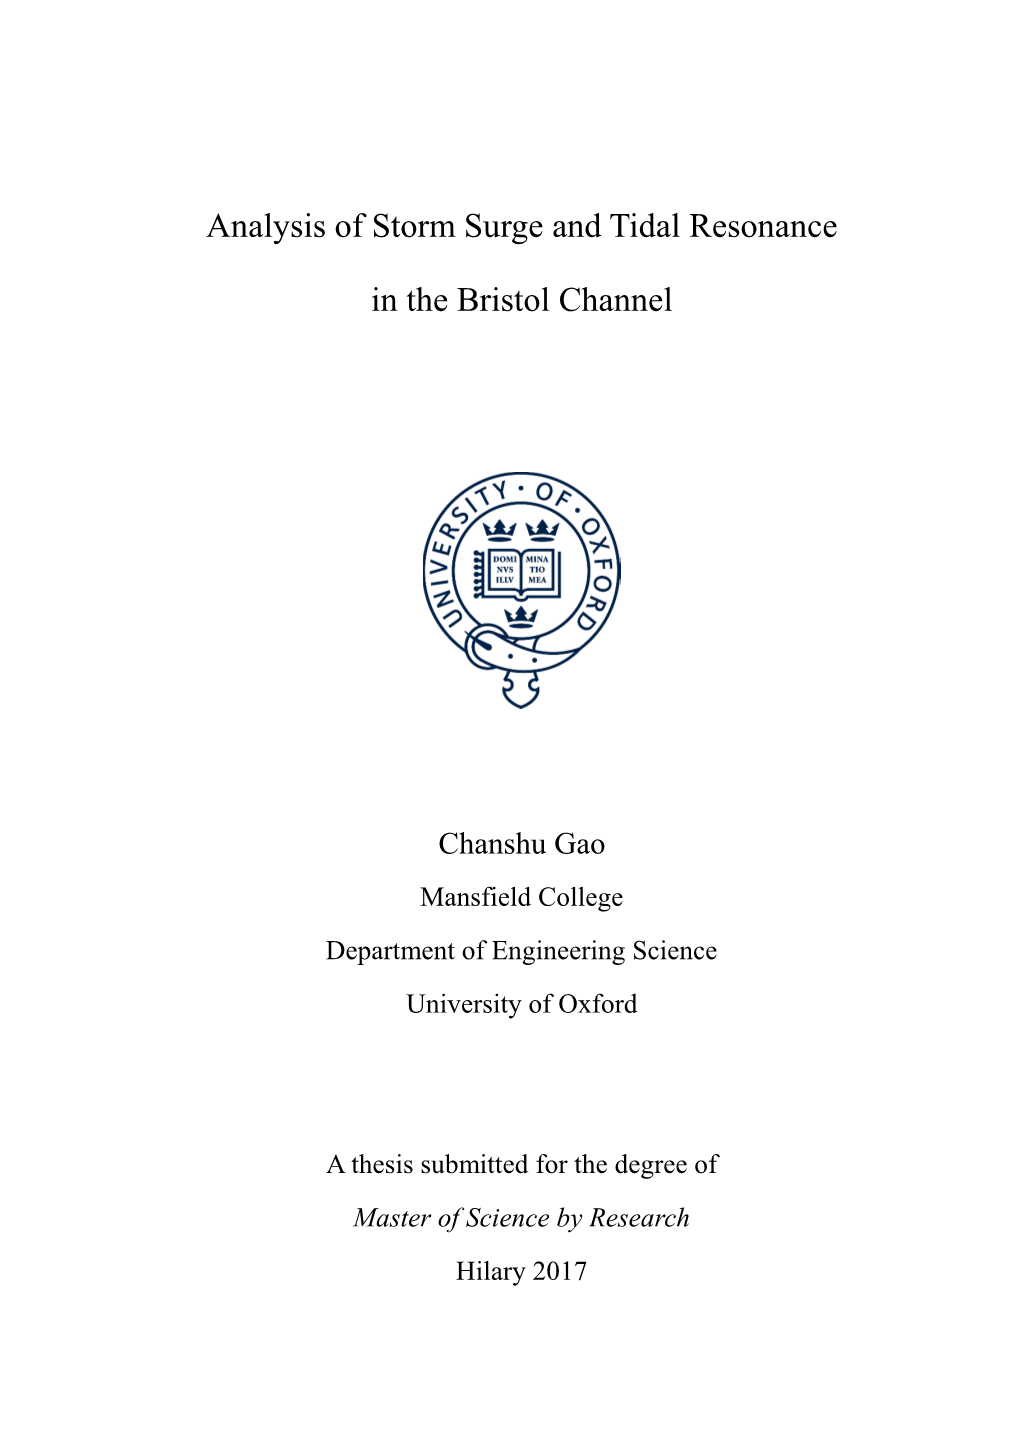 Analysis of Storm Surge and Tidal Resonance in the Bristol Channel